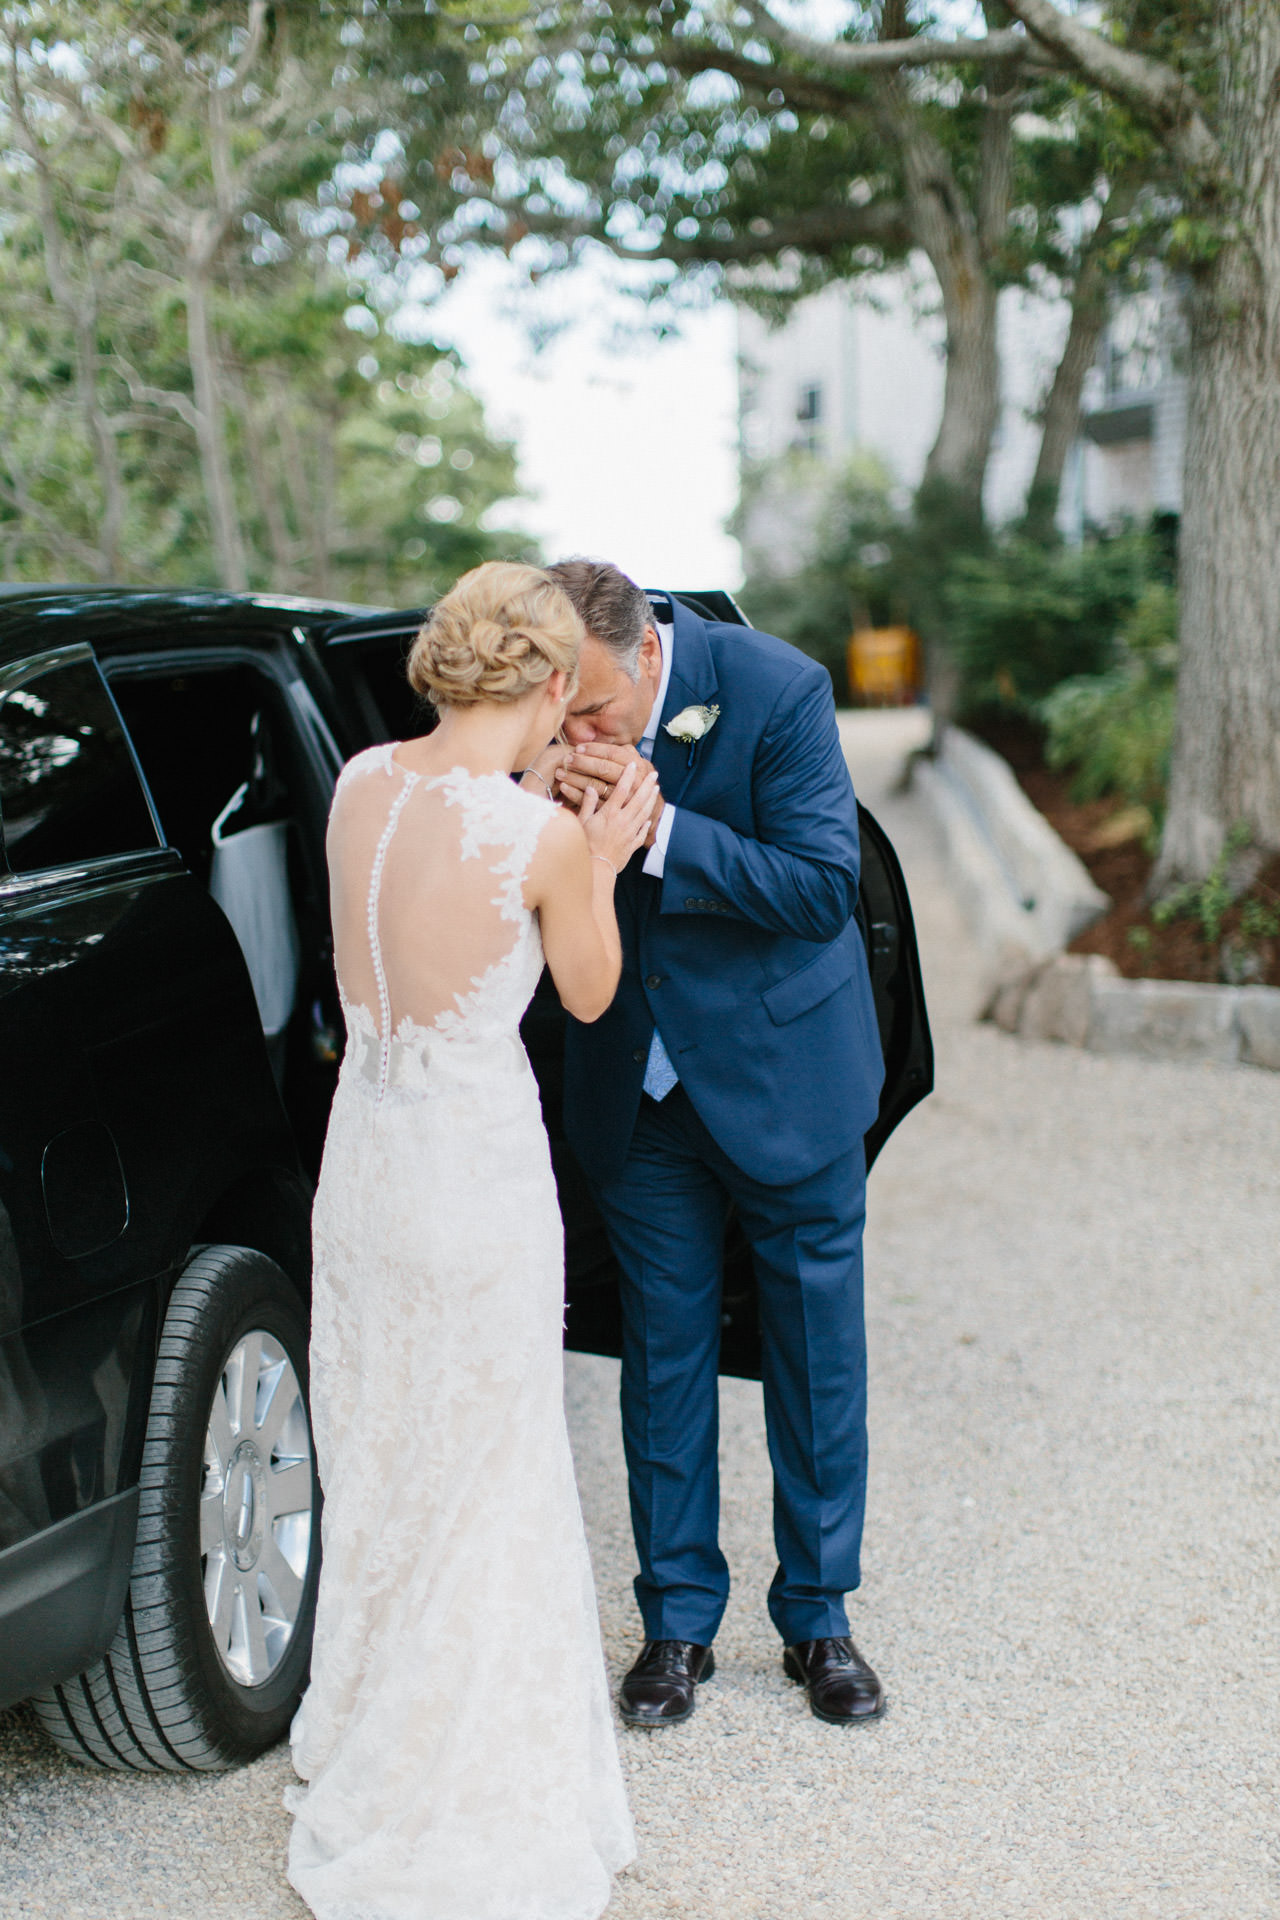 Bride's father kissing her hands at The Coonamessett Inn in Falmouth, MA